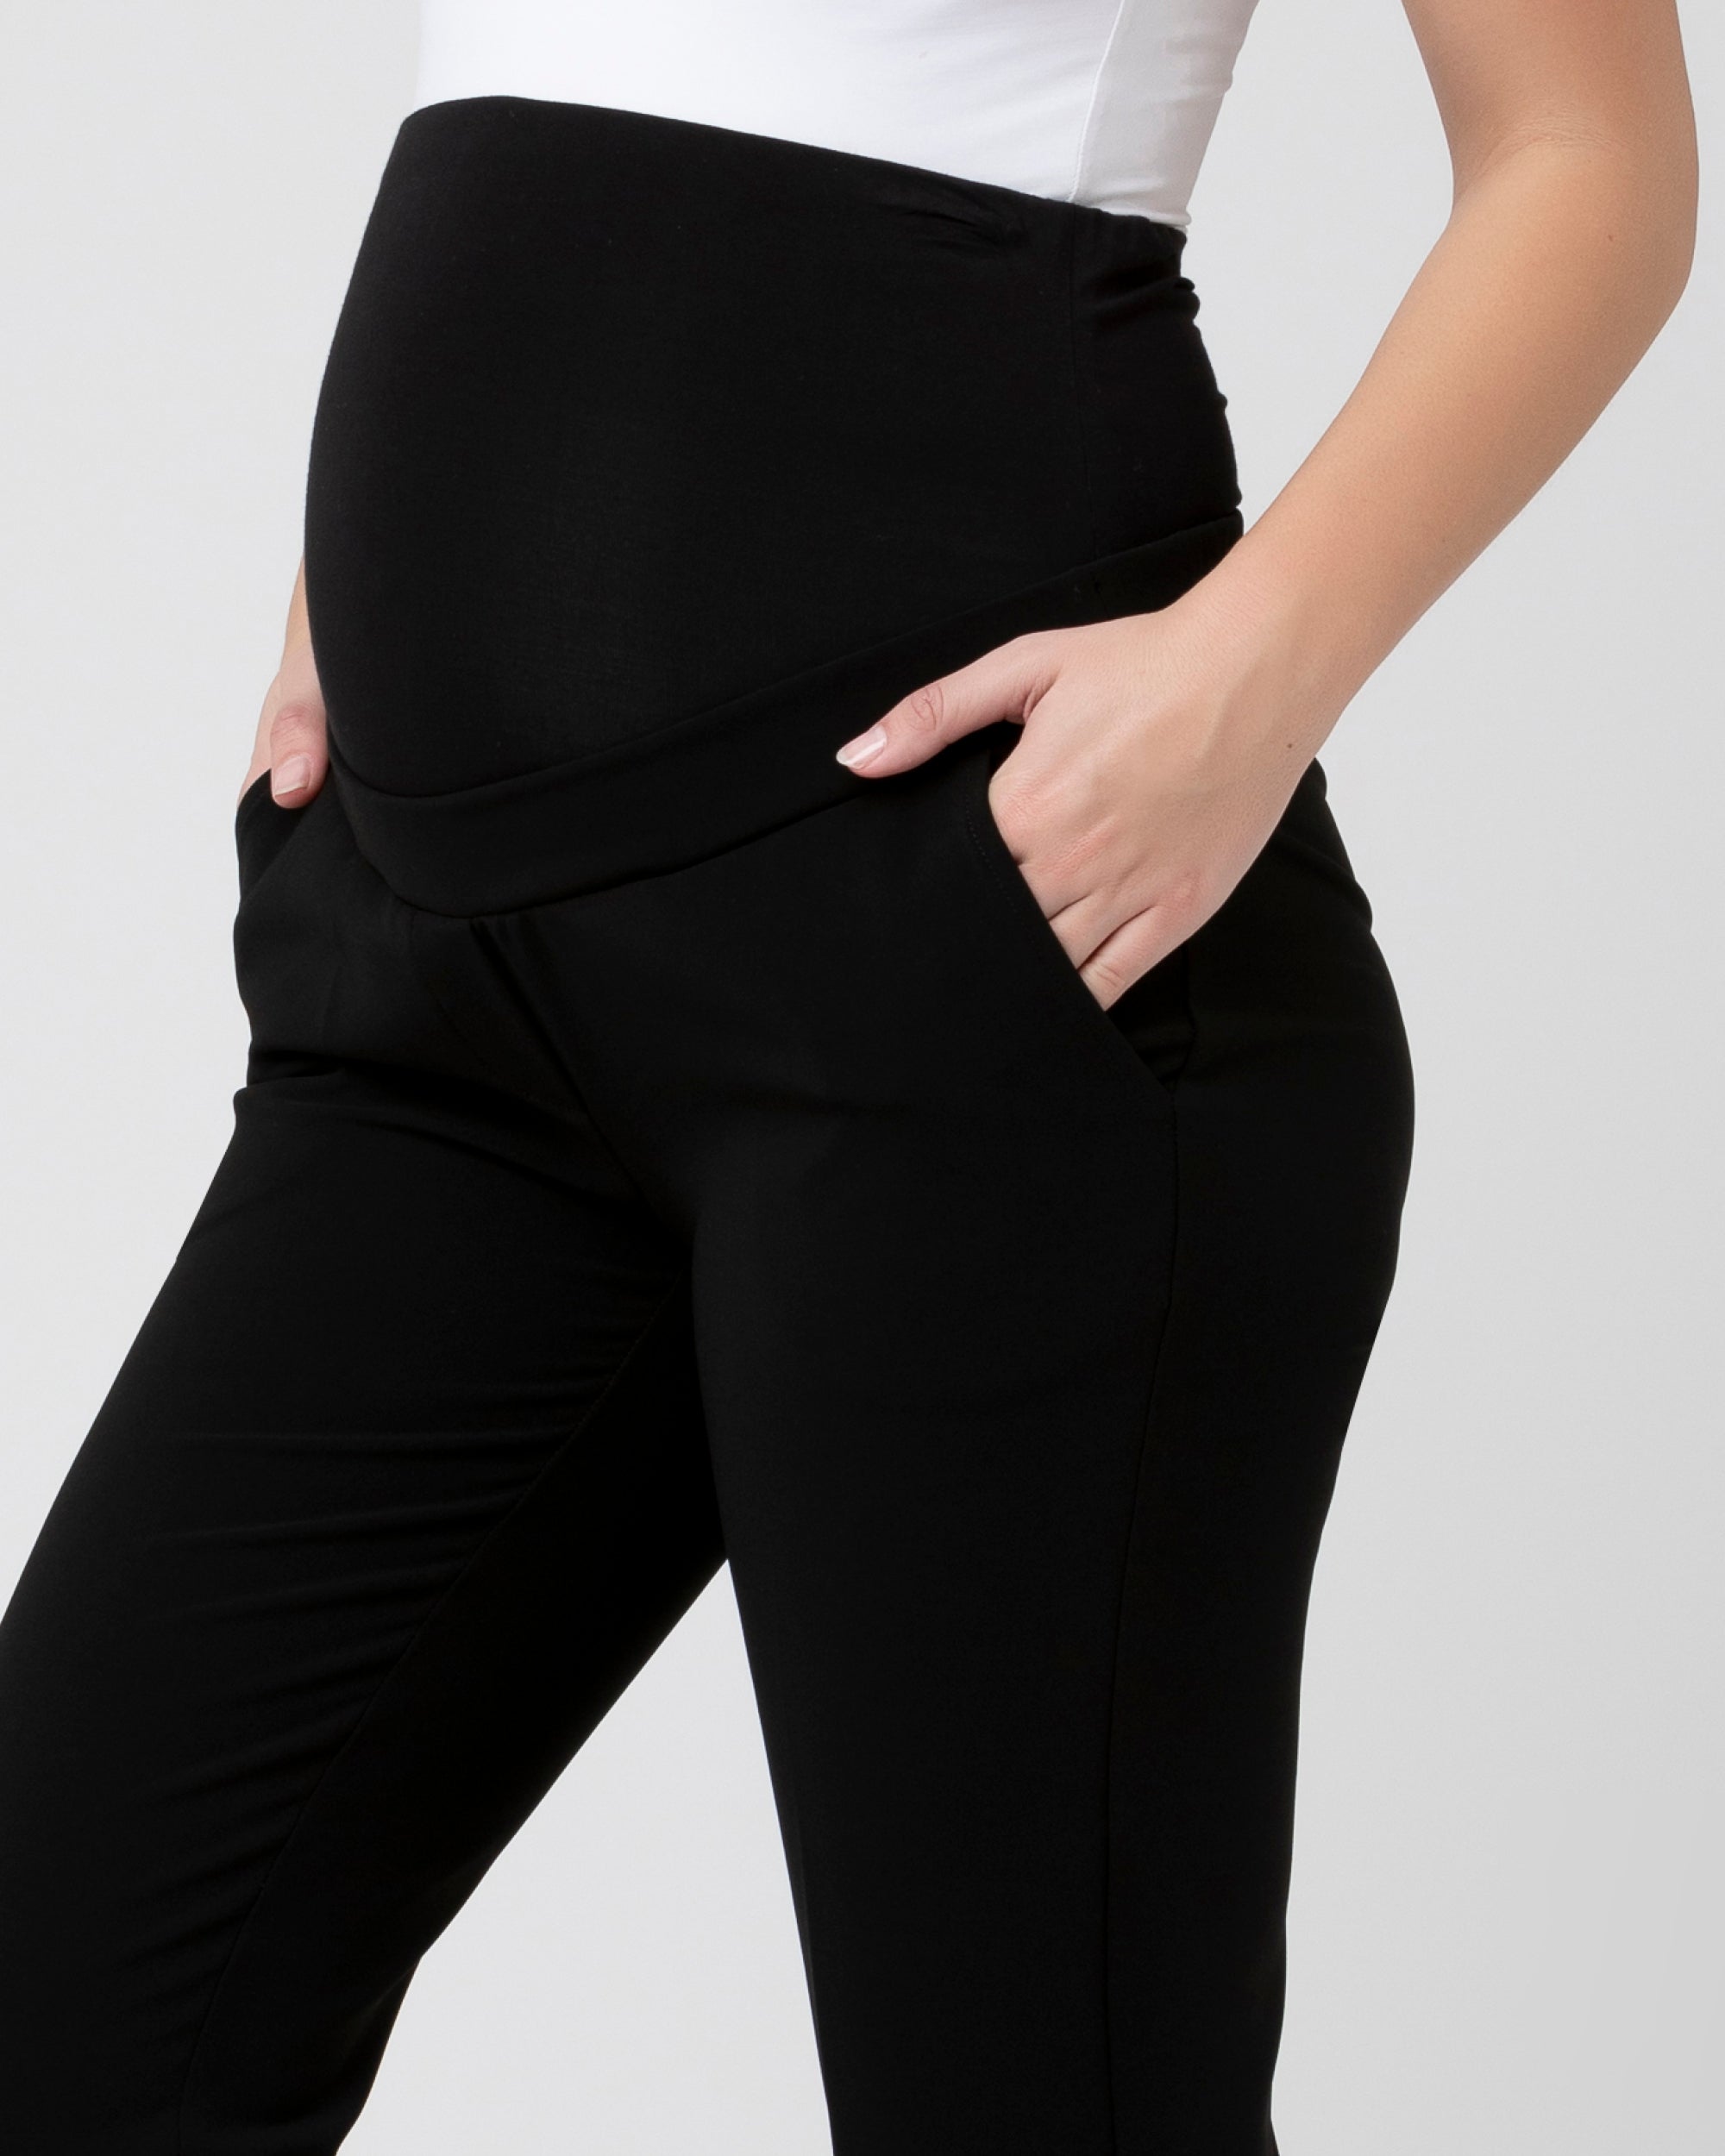 The Best Maternity Pants for the Office  CorporetteMoms